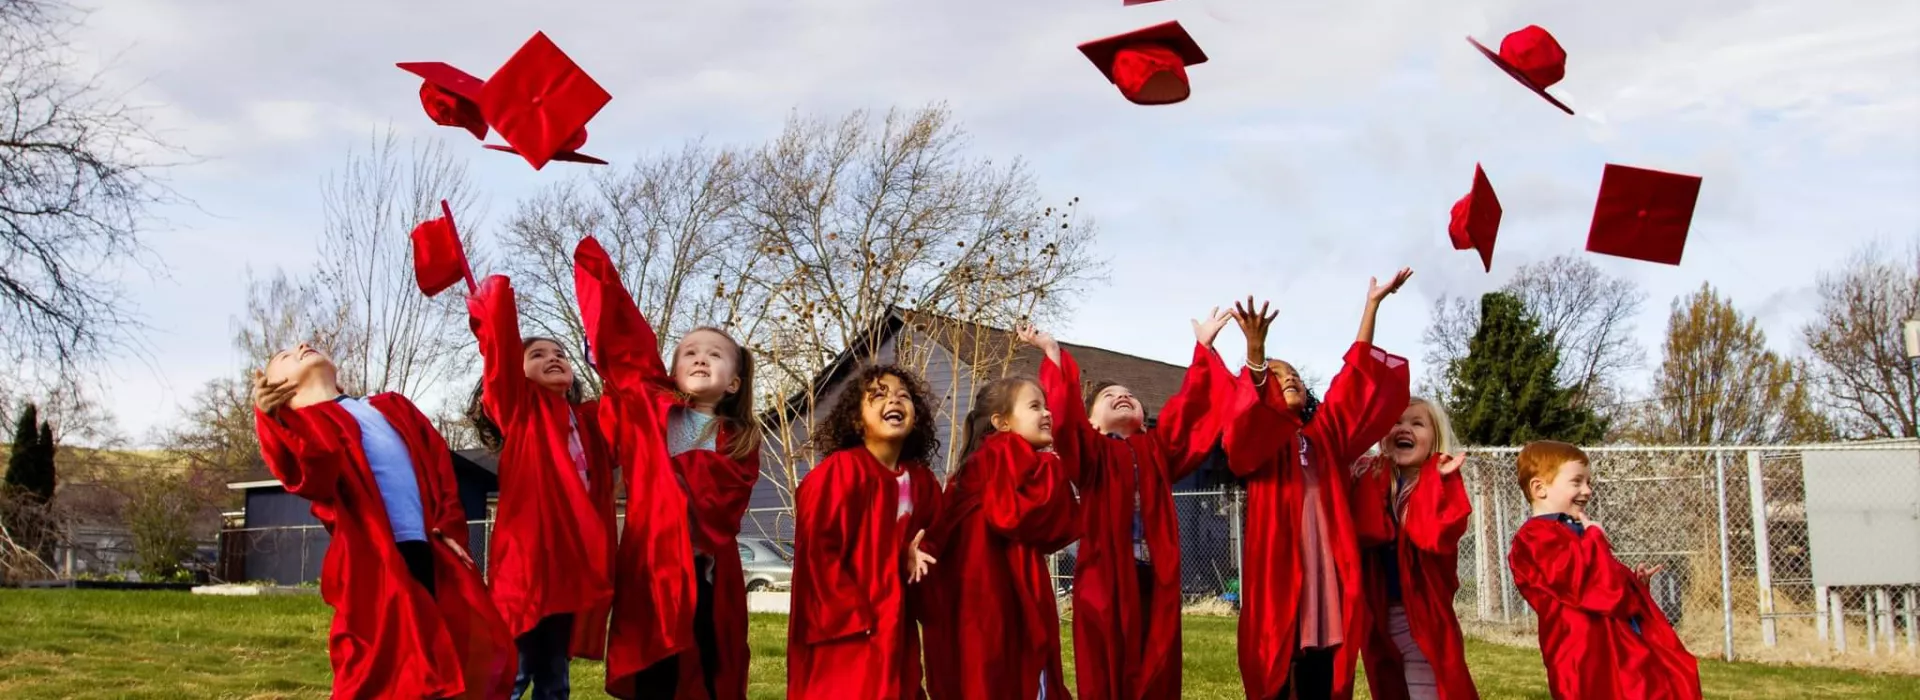 Nine preschool children standing in a line on a grassy field, wearing red gowns and joyfully tossing red graduation caps above them.